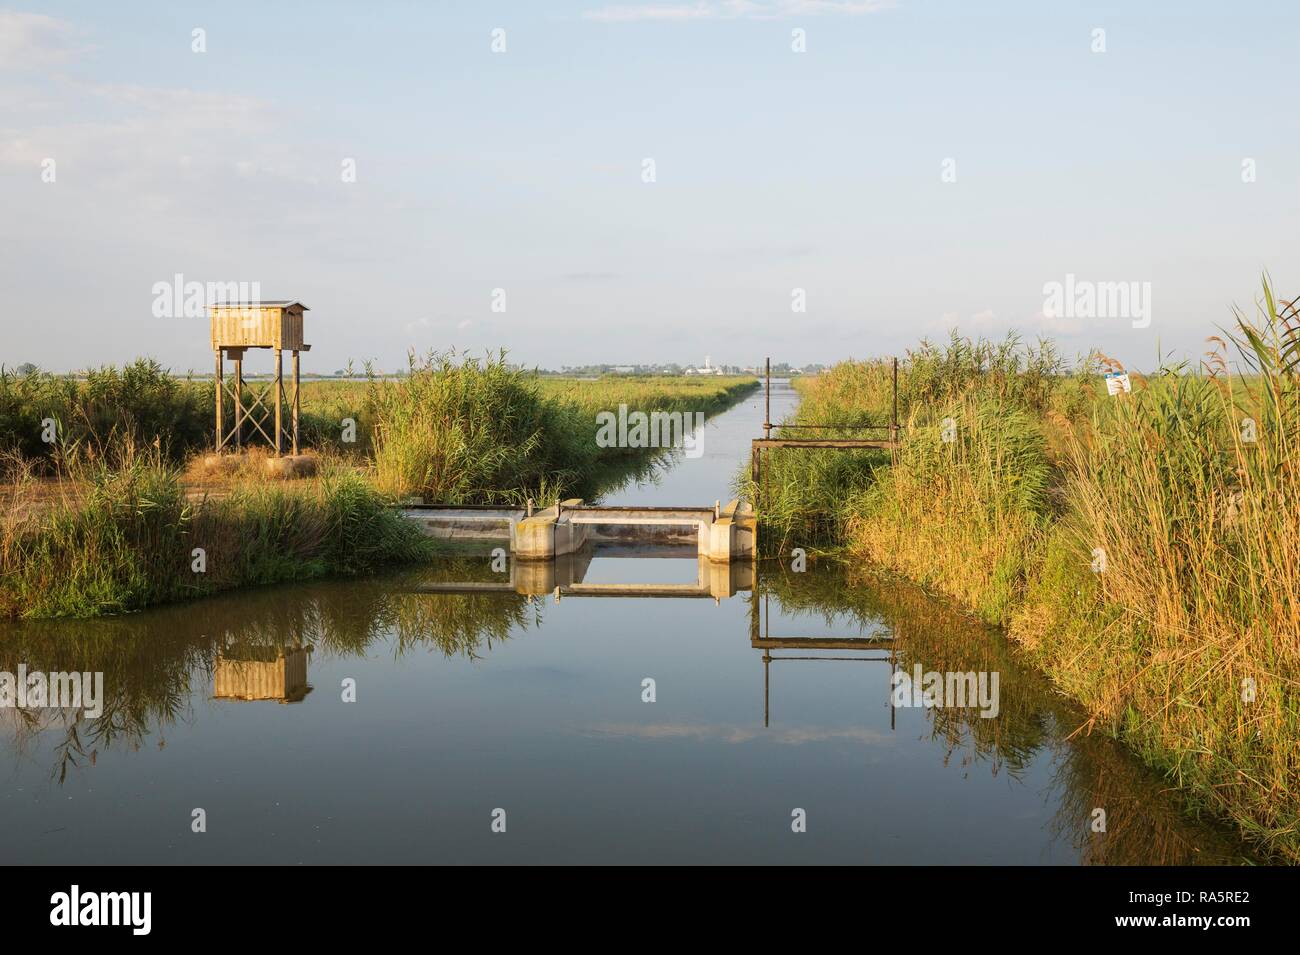 Typical landscape of the Ebro Delta with canals, lock-gate, reed and rice fields, on the left a box for bats, behind the village Stock Photo